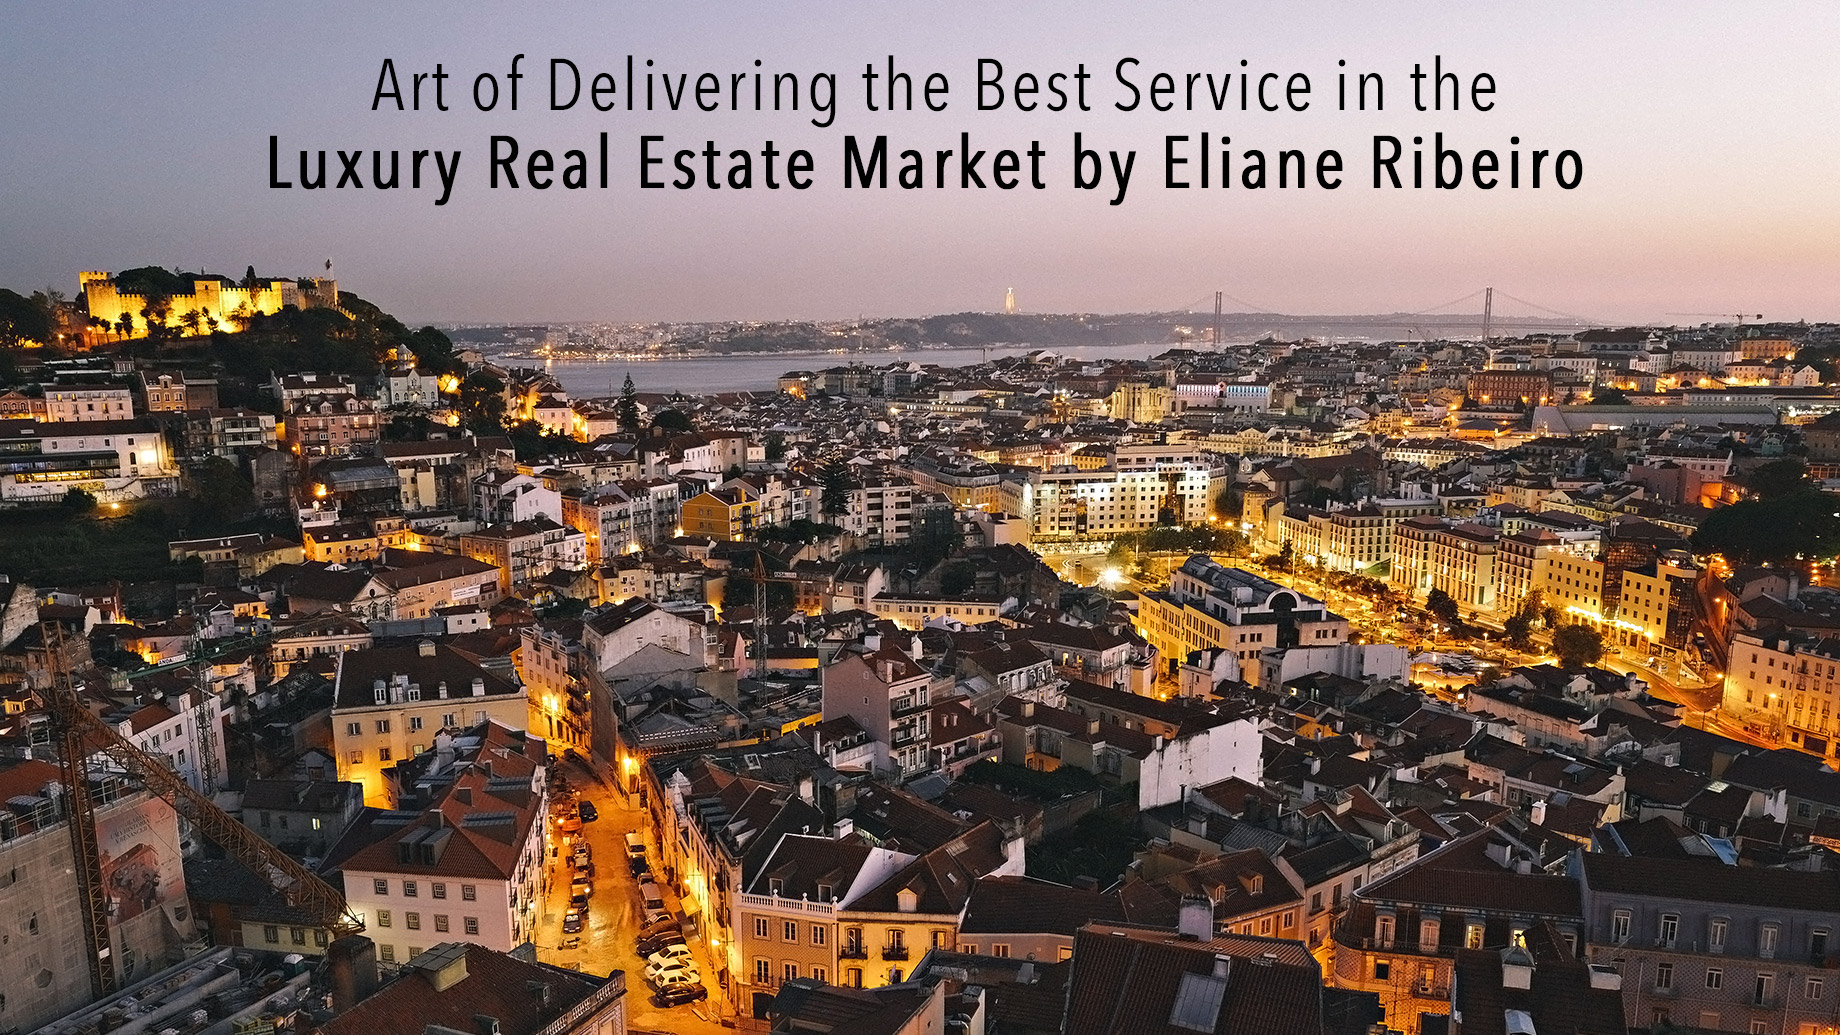 Art of Delivering the Best Service in the Luxury Real Estate Market by Eliane Ribeiro